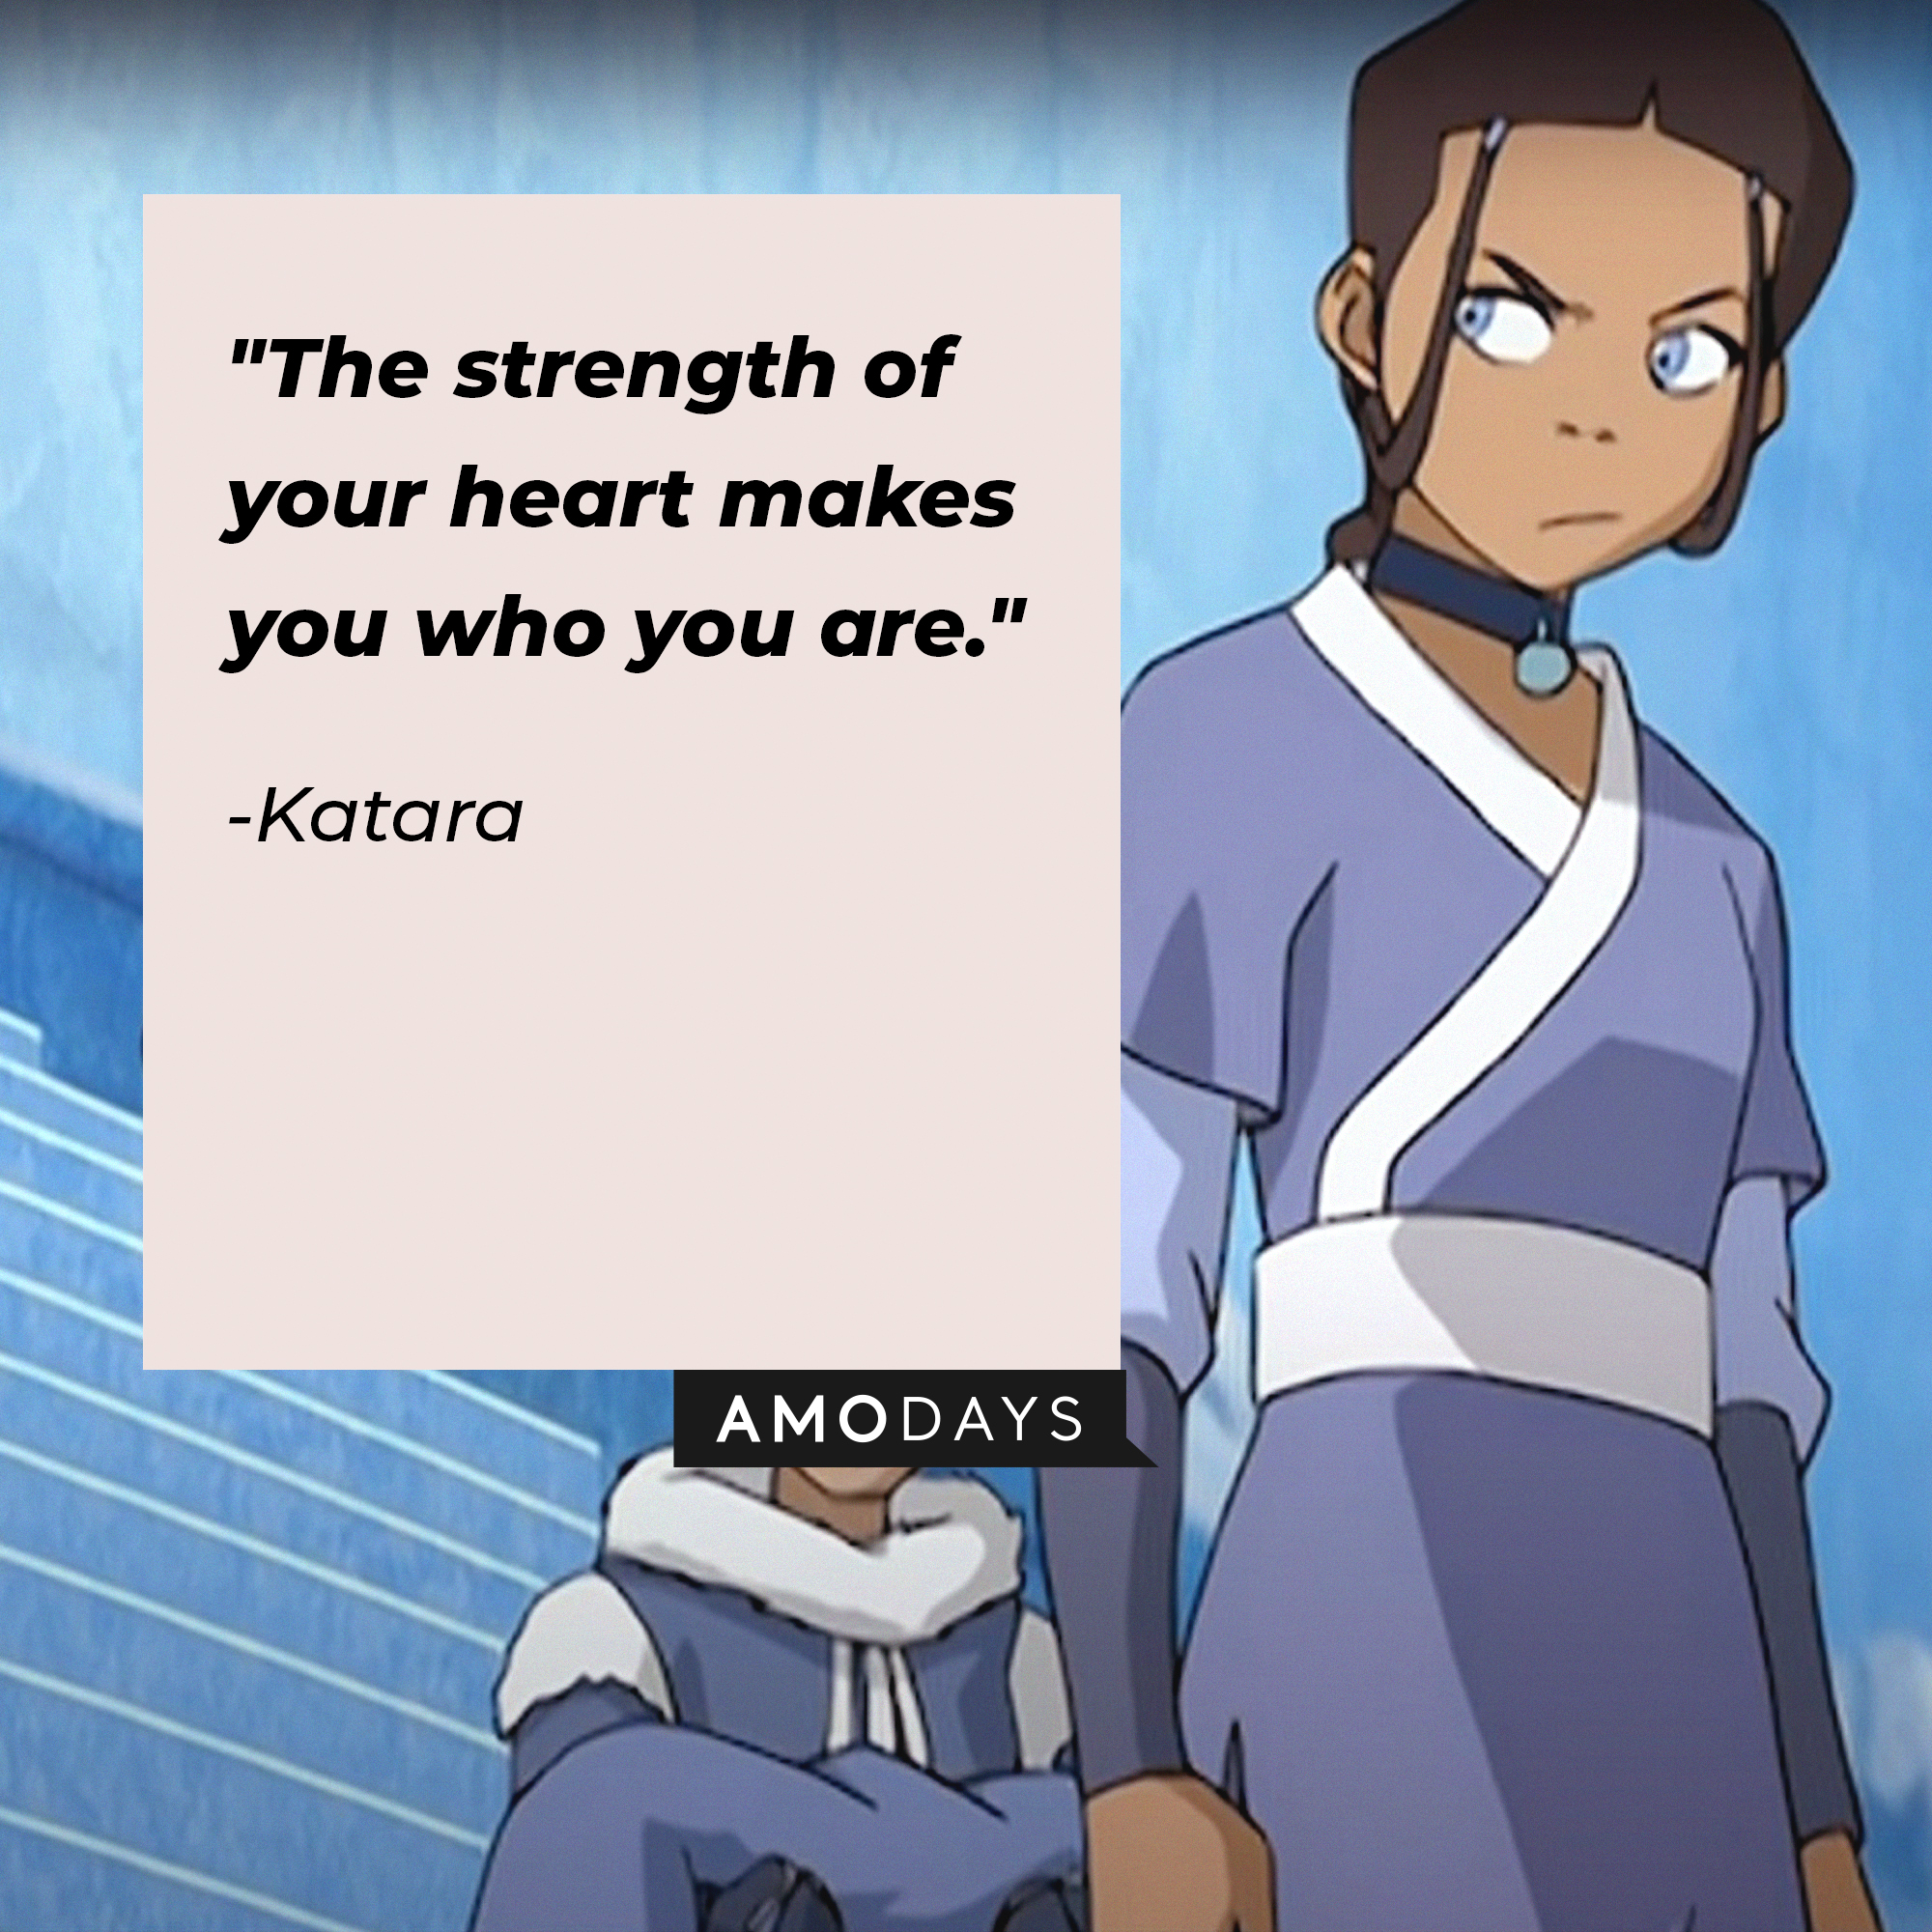 Avatar The Last Airbender Quotes To Live By  Guide For Geek Moms